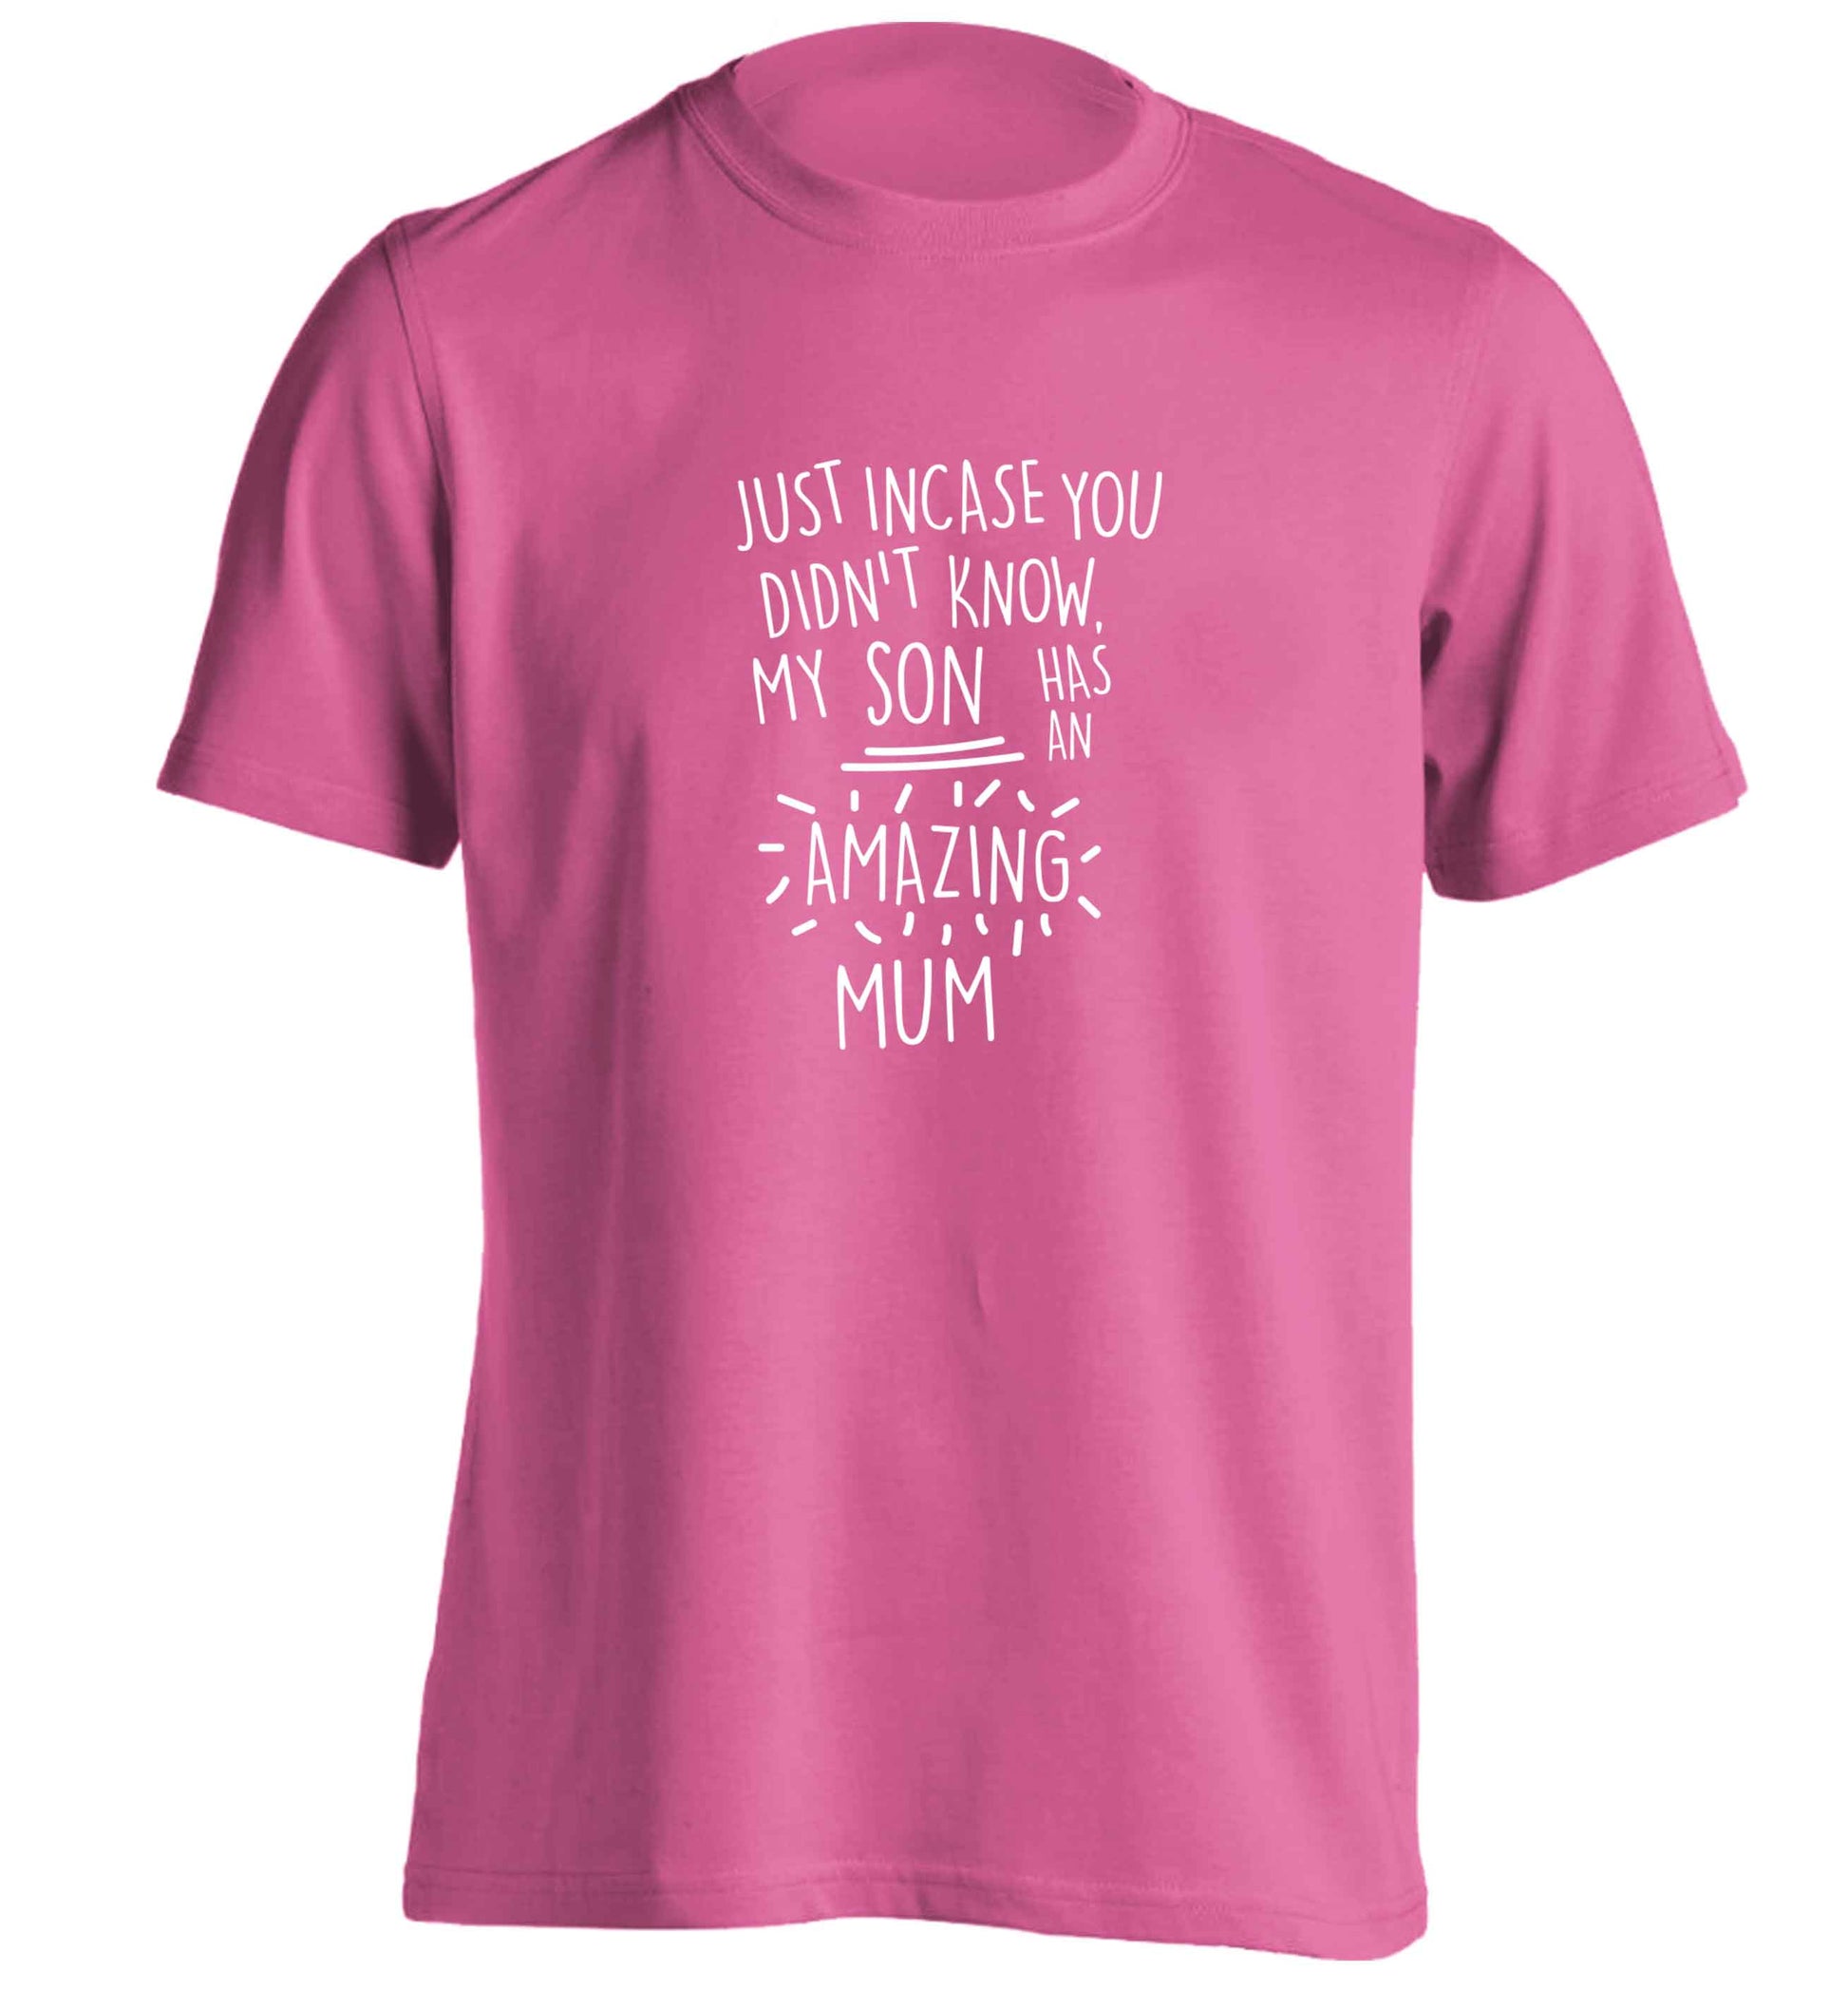 Just incase you didn't know my son has an amazing mum adults unisex pink Tshirt 2XL